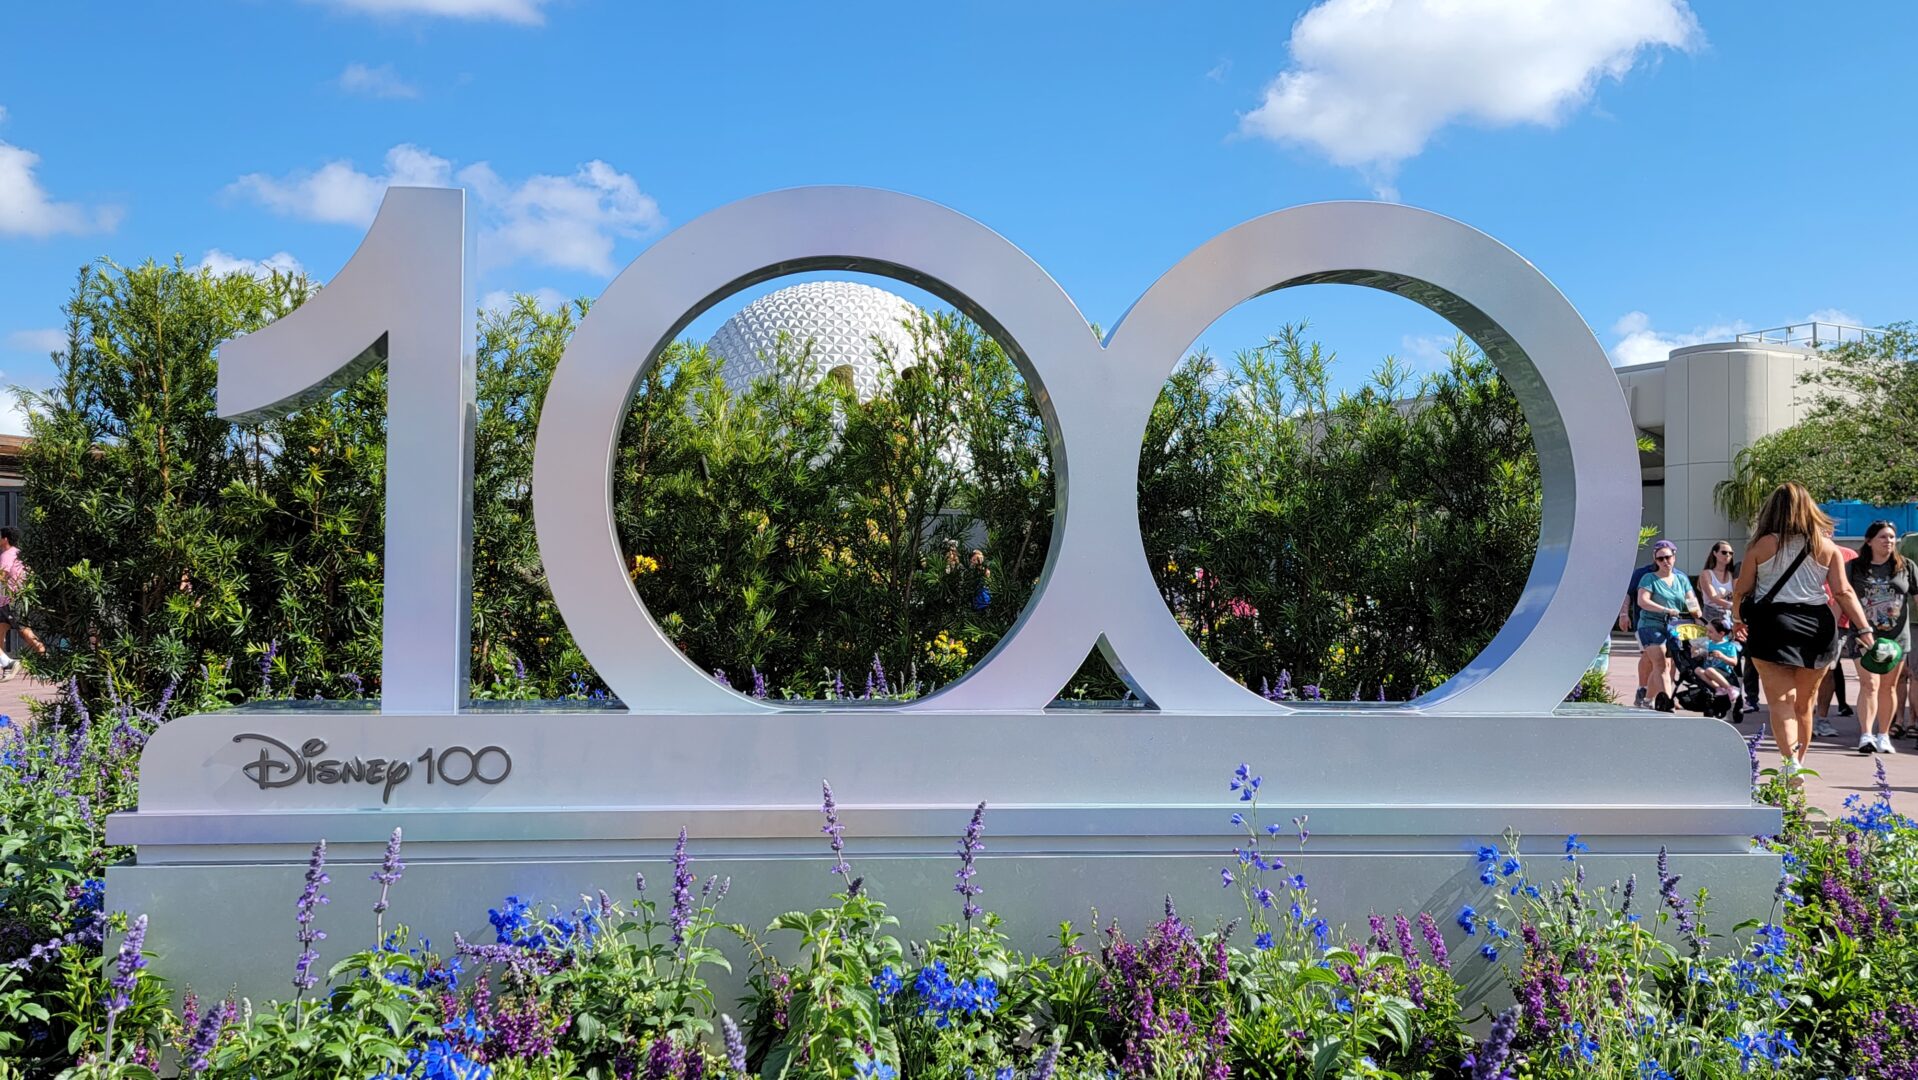 New Disney100 Sign added to EPCOT